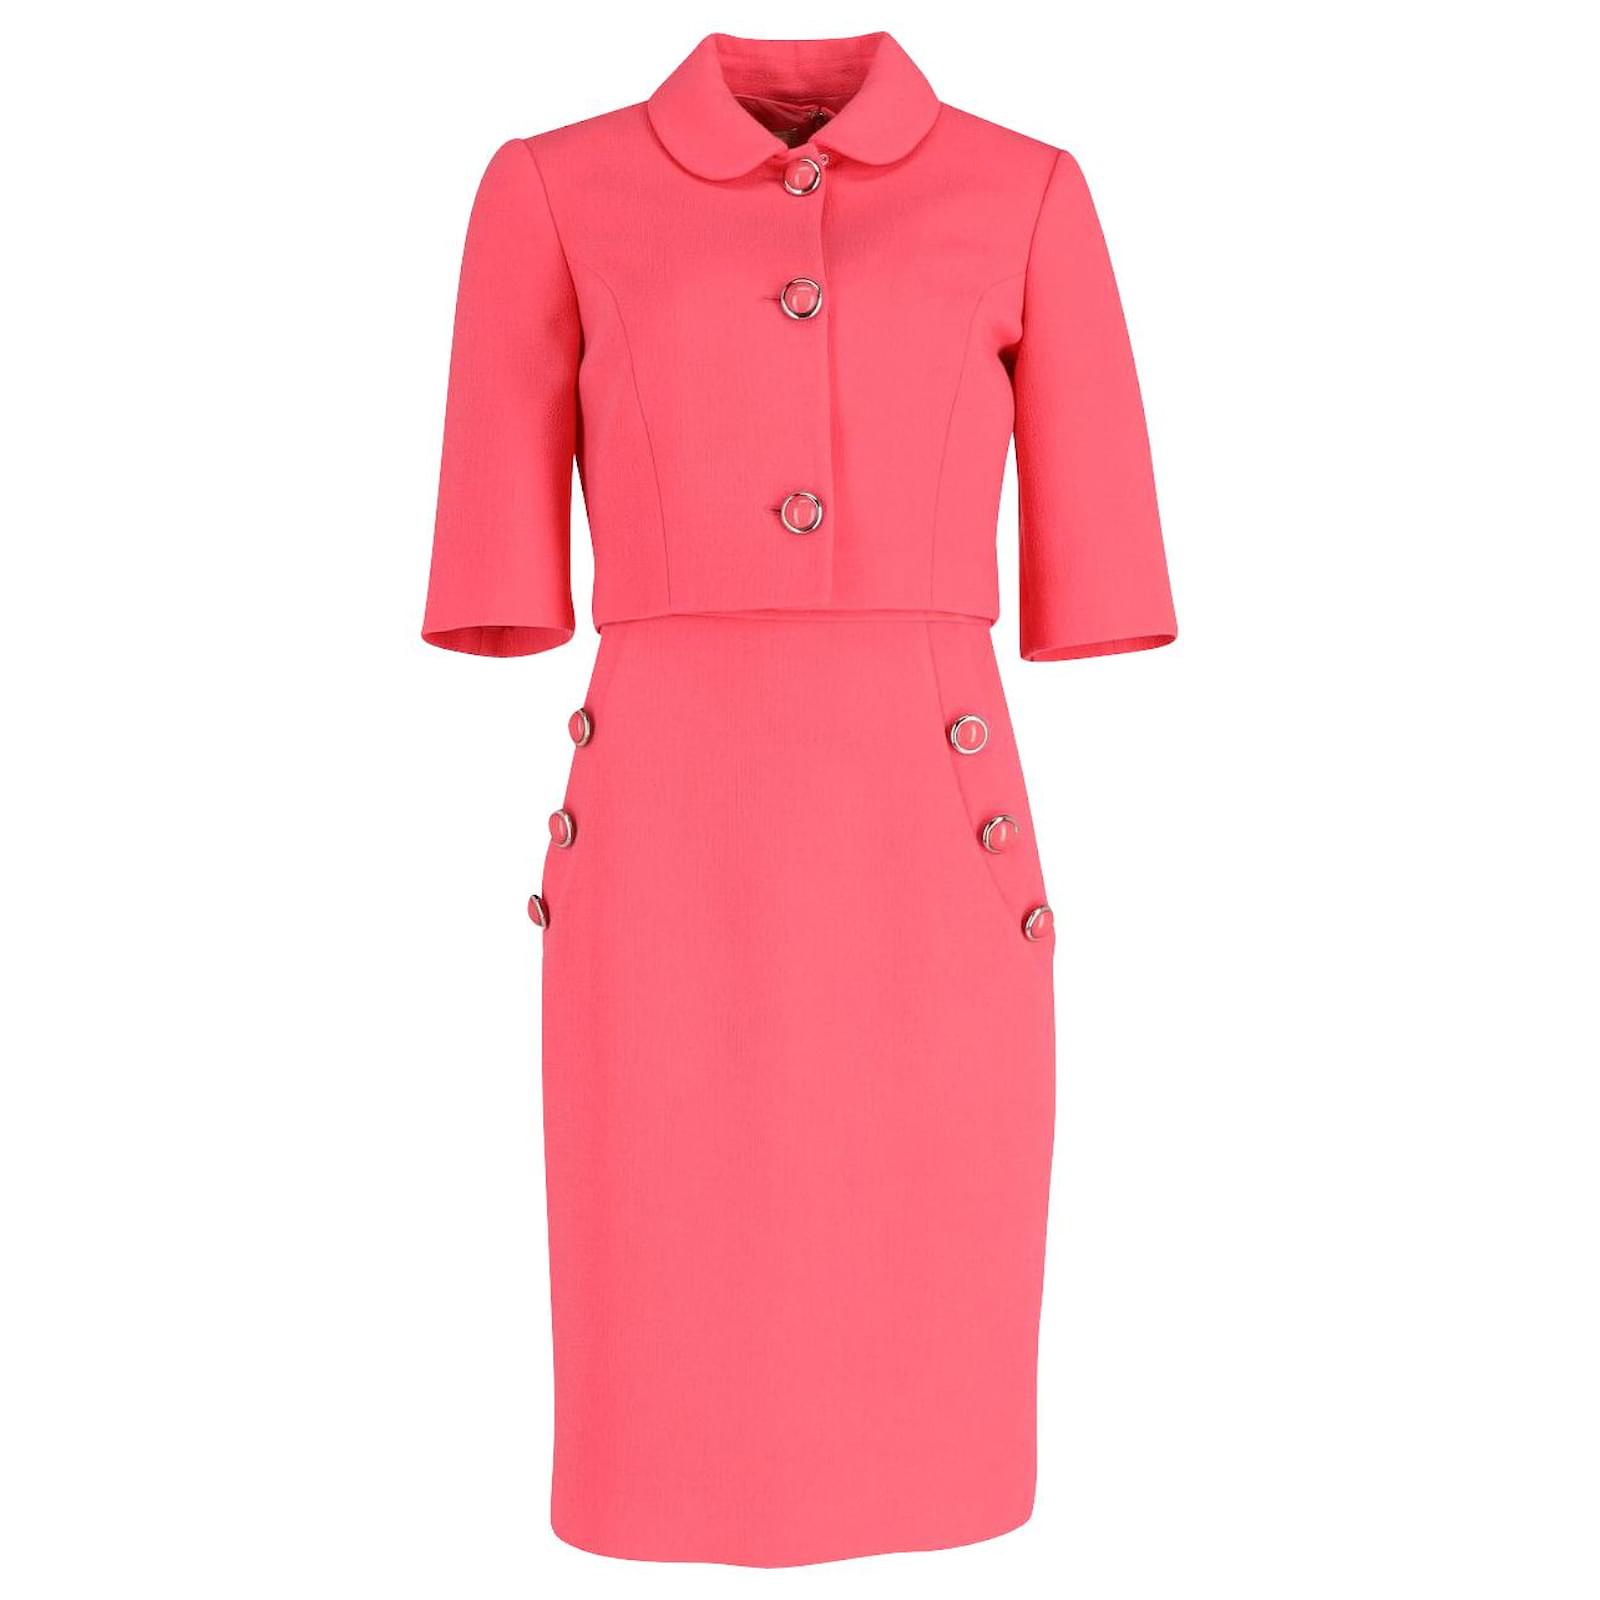 Michael Kors Button-Embellished Shift Dress with Cropped Jacket in Coral  Pink Wool  - Joli Closet